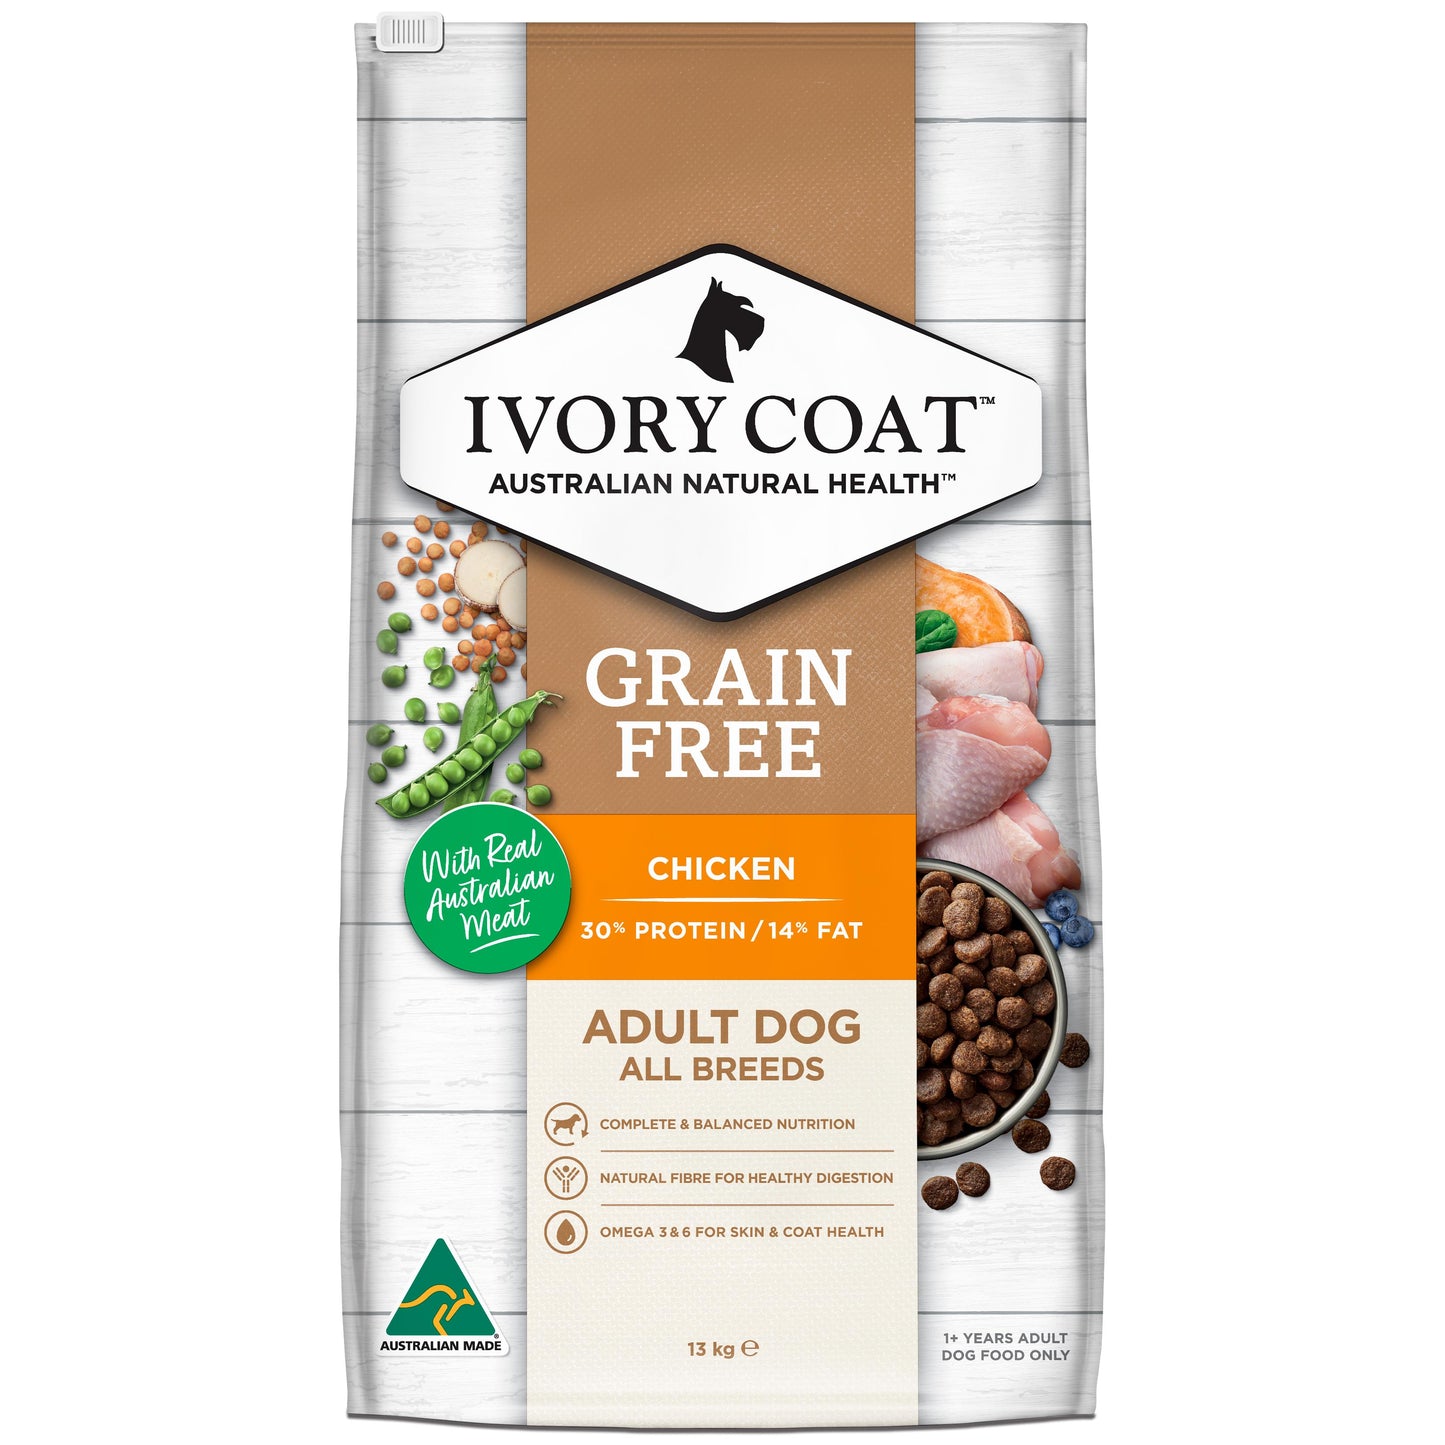 Ivory Coat Grain Free Chicken Dry Food for Adult Dogs